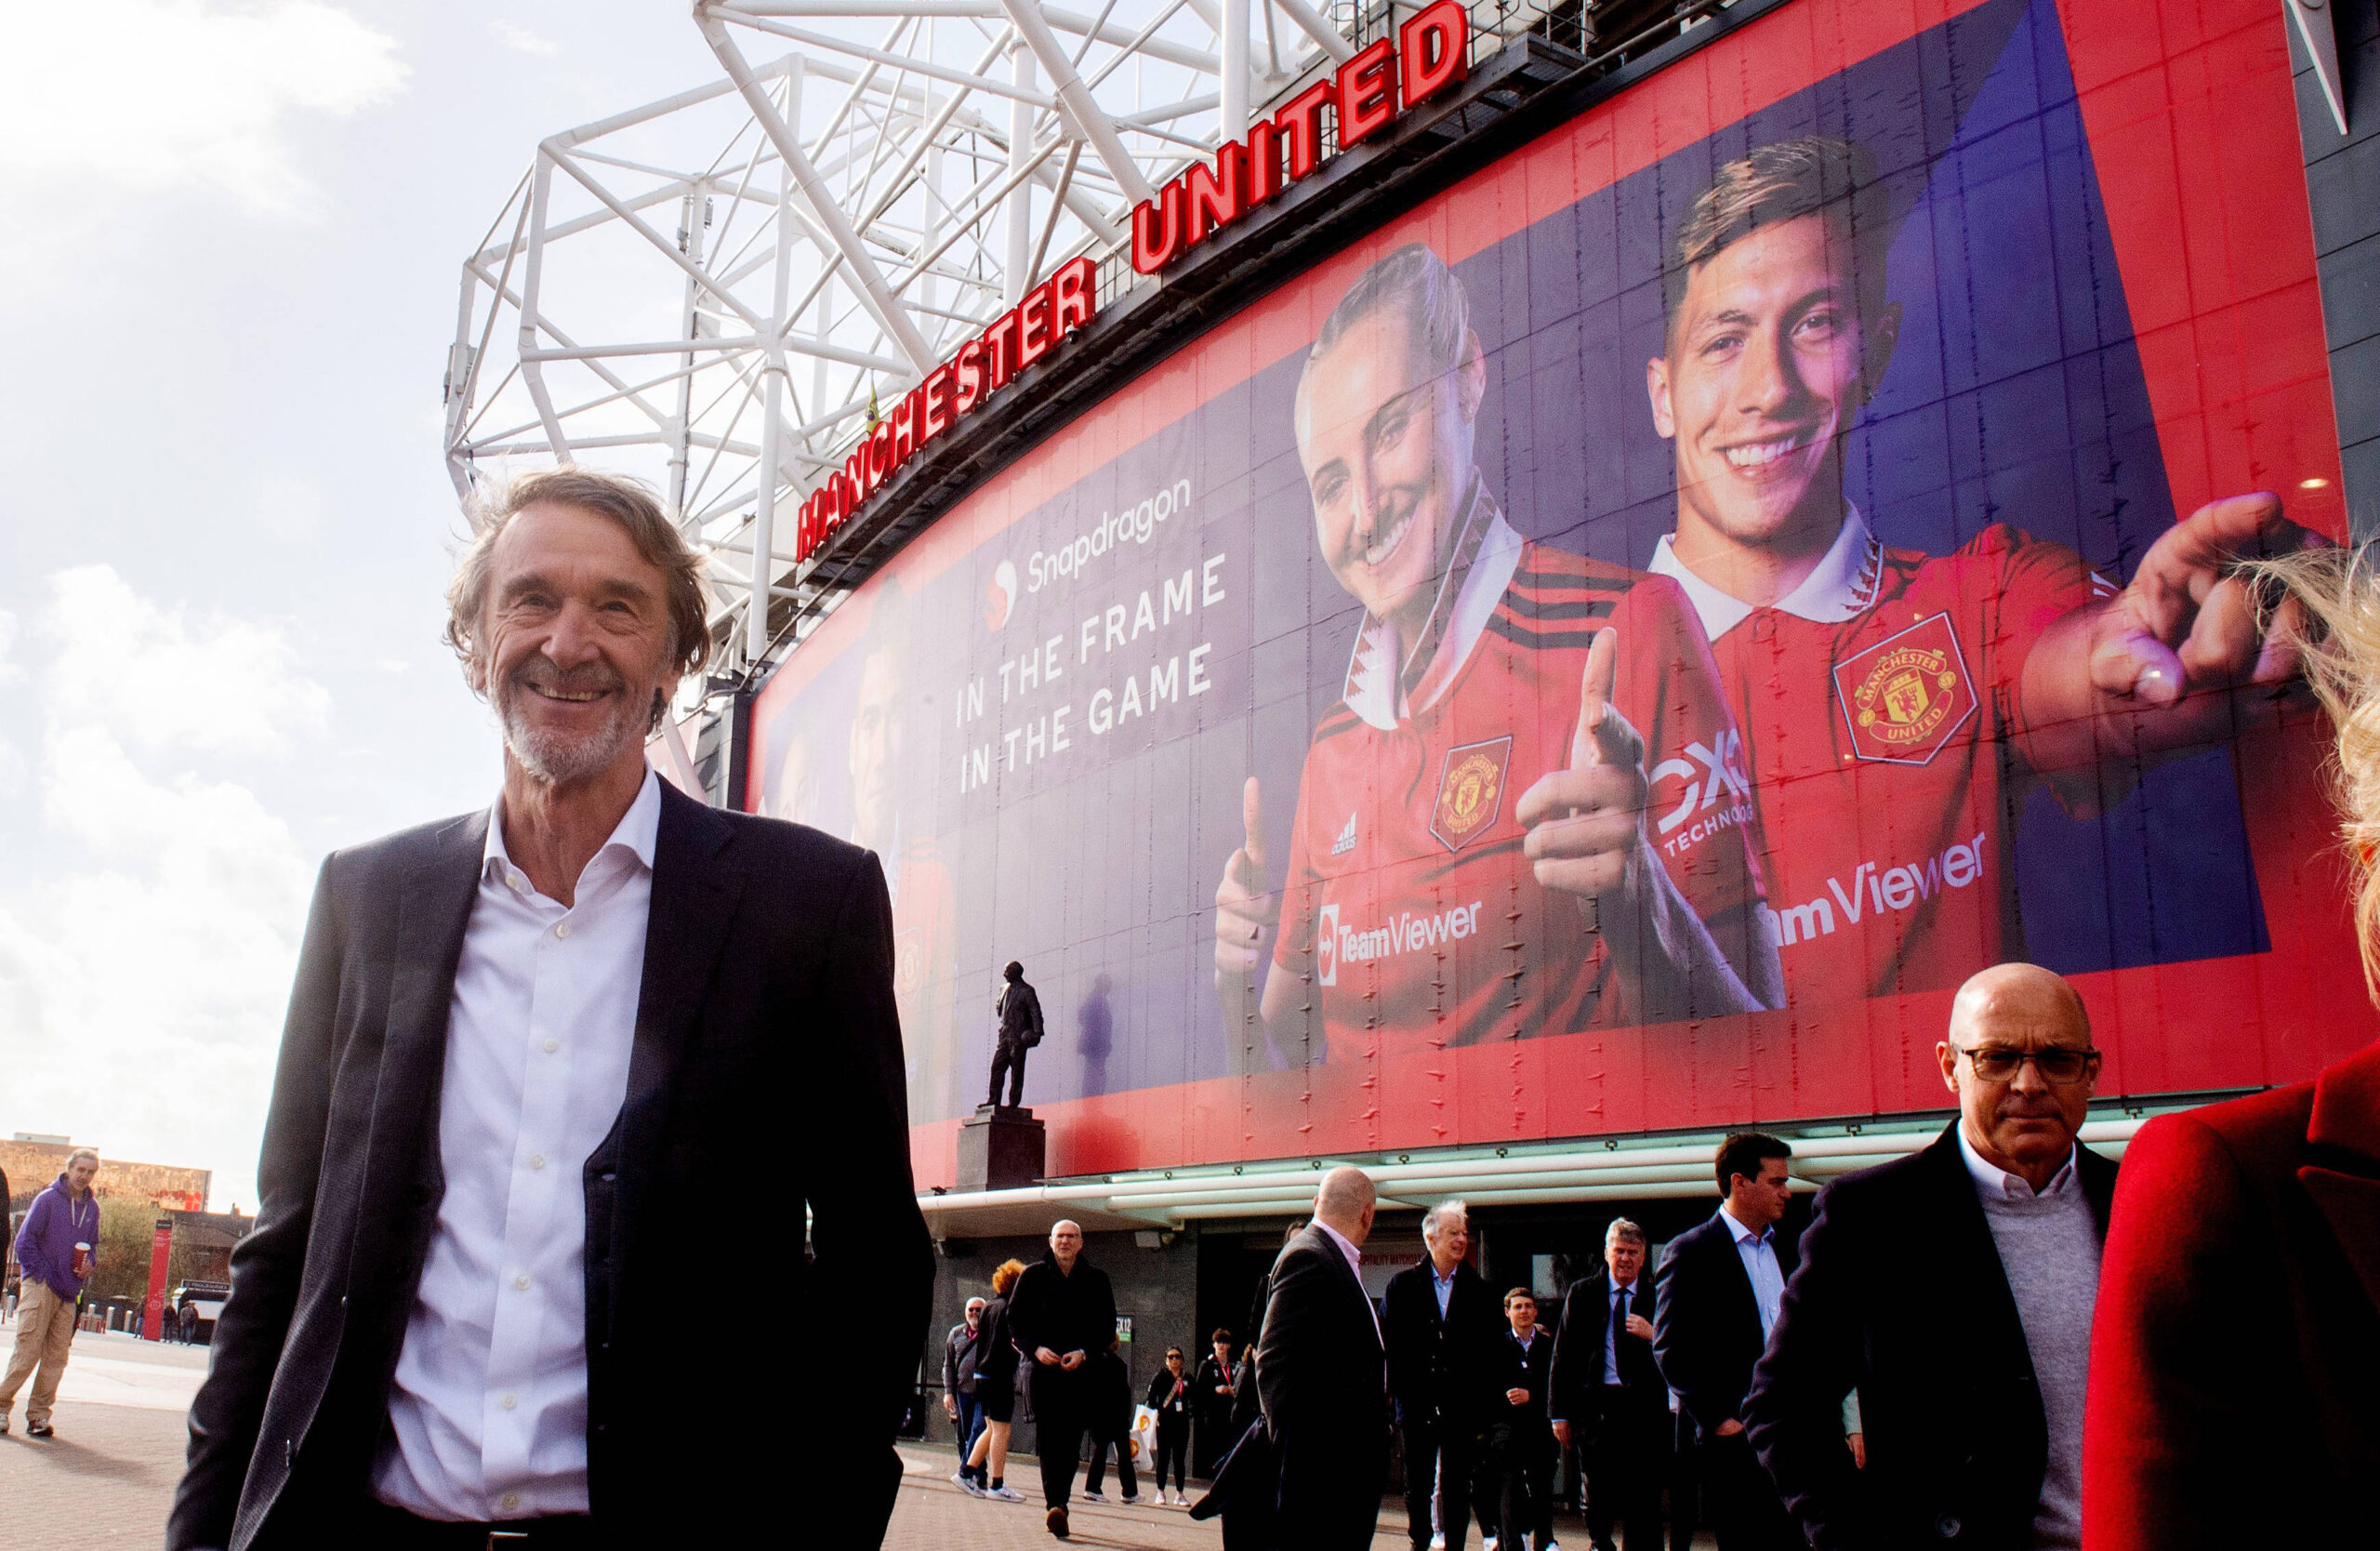 Sir Jim Ratcliffe / INEOS Complete Agreement to Purchase 25% of Manchester United